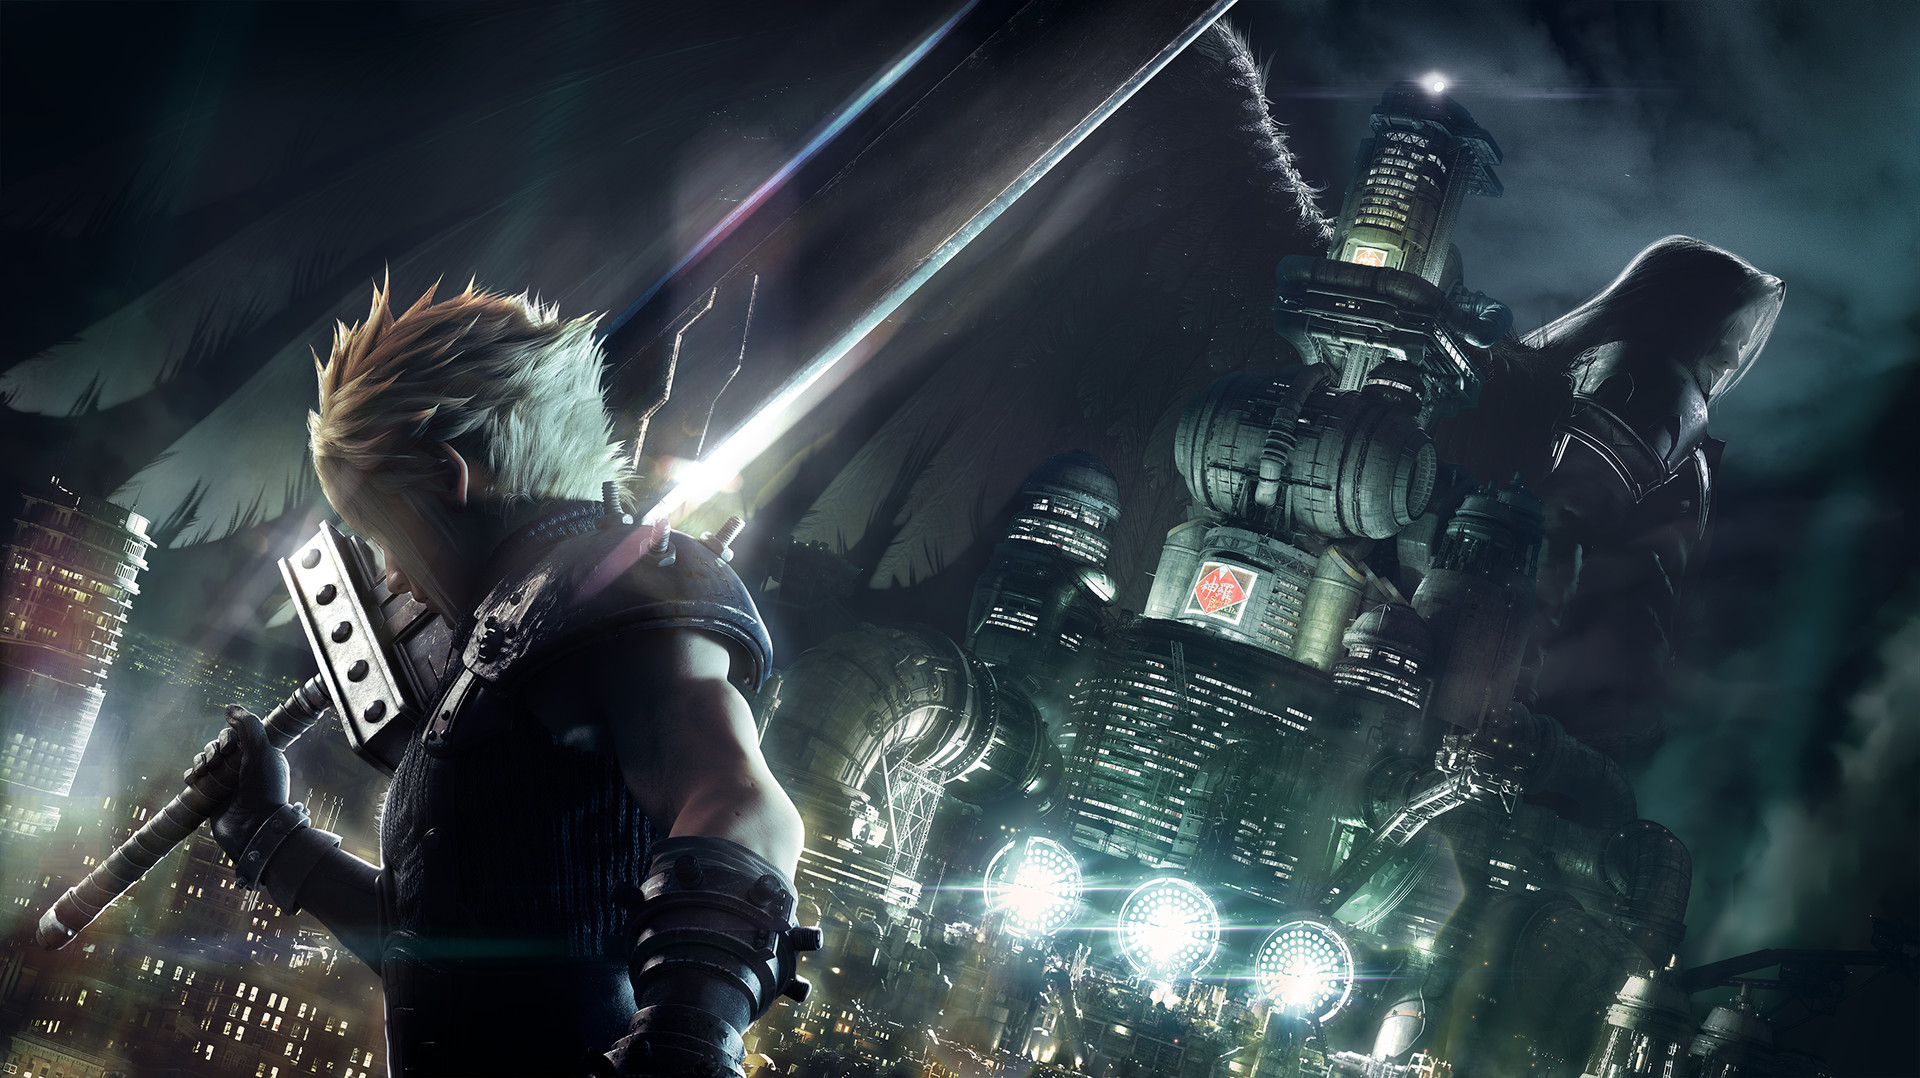 Ever Crisis, The First Soldier, and Shinra logo trademarked in Japan by Square Enix